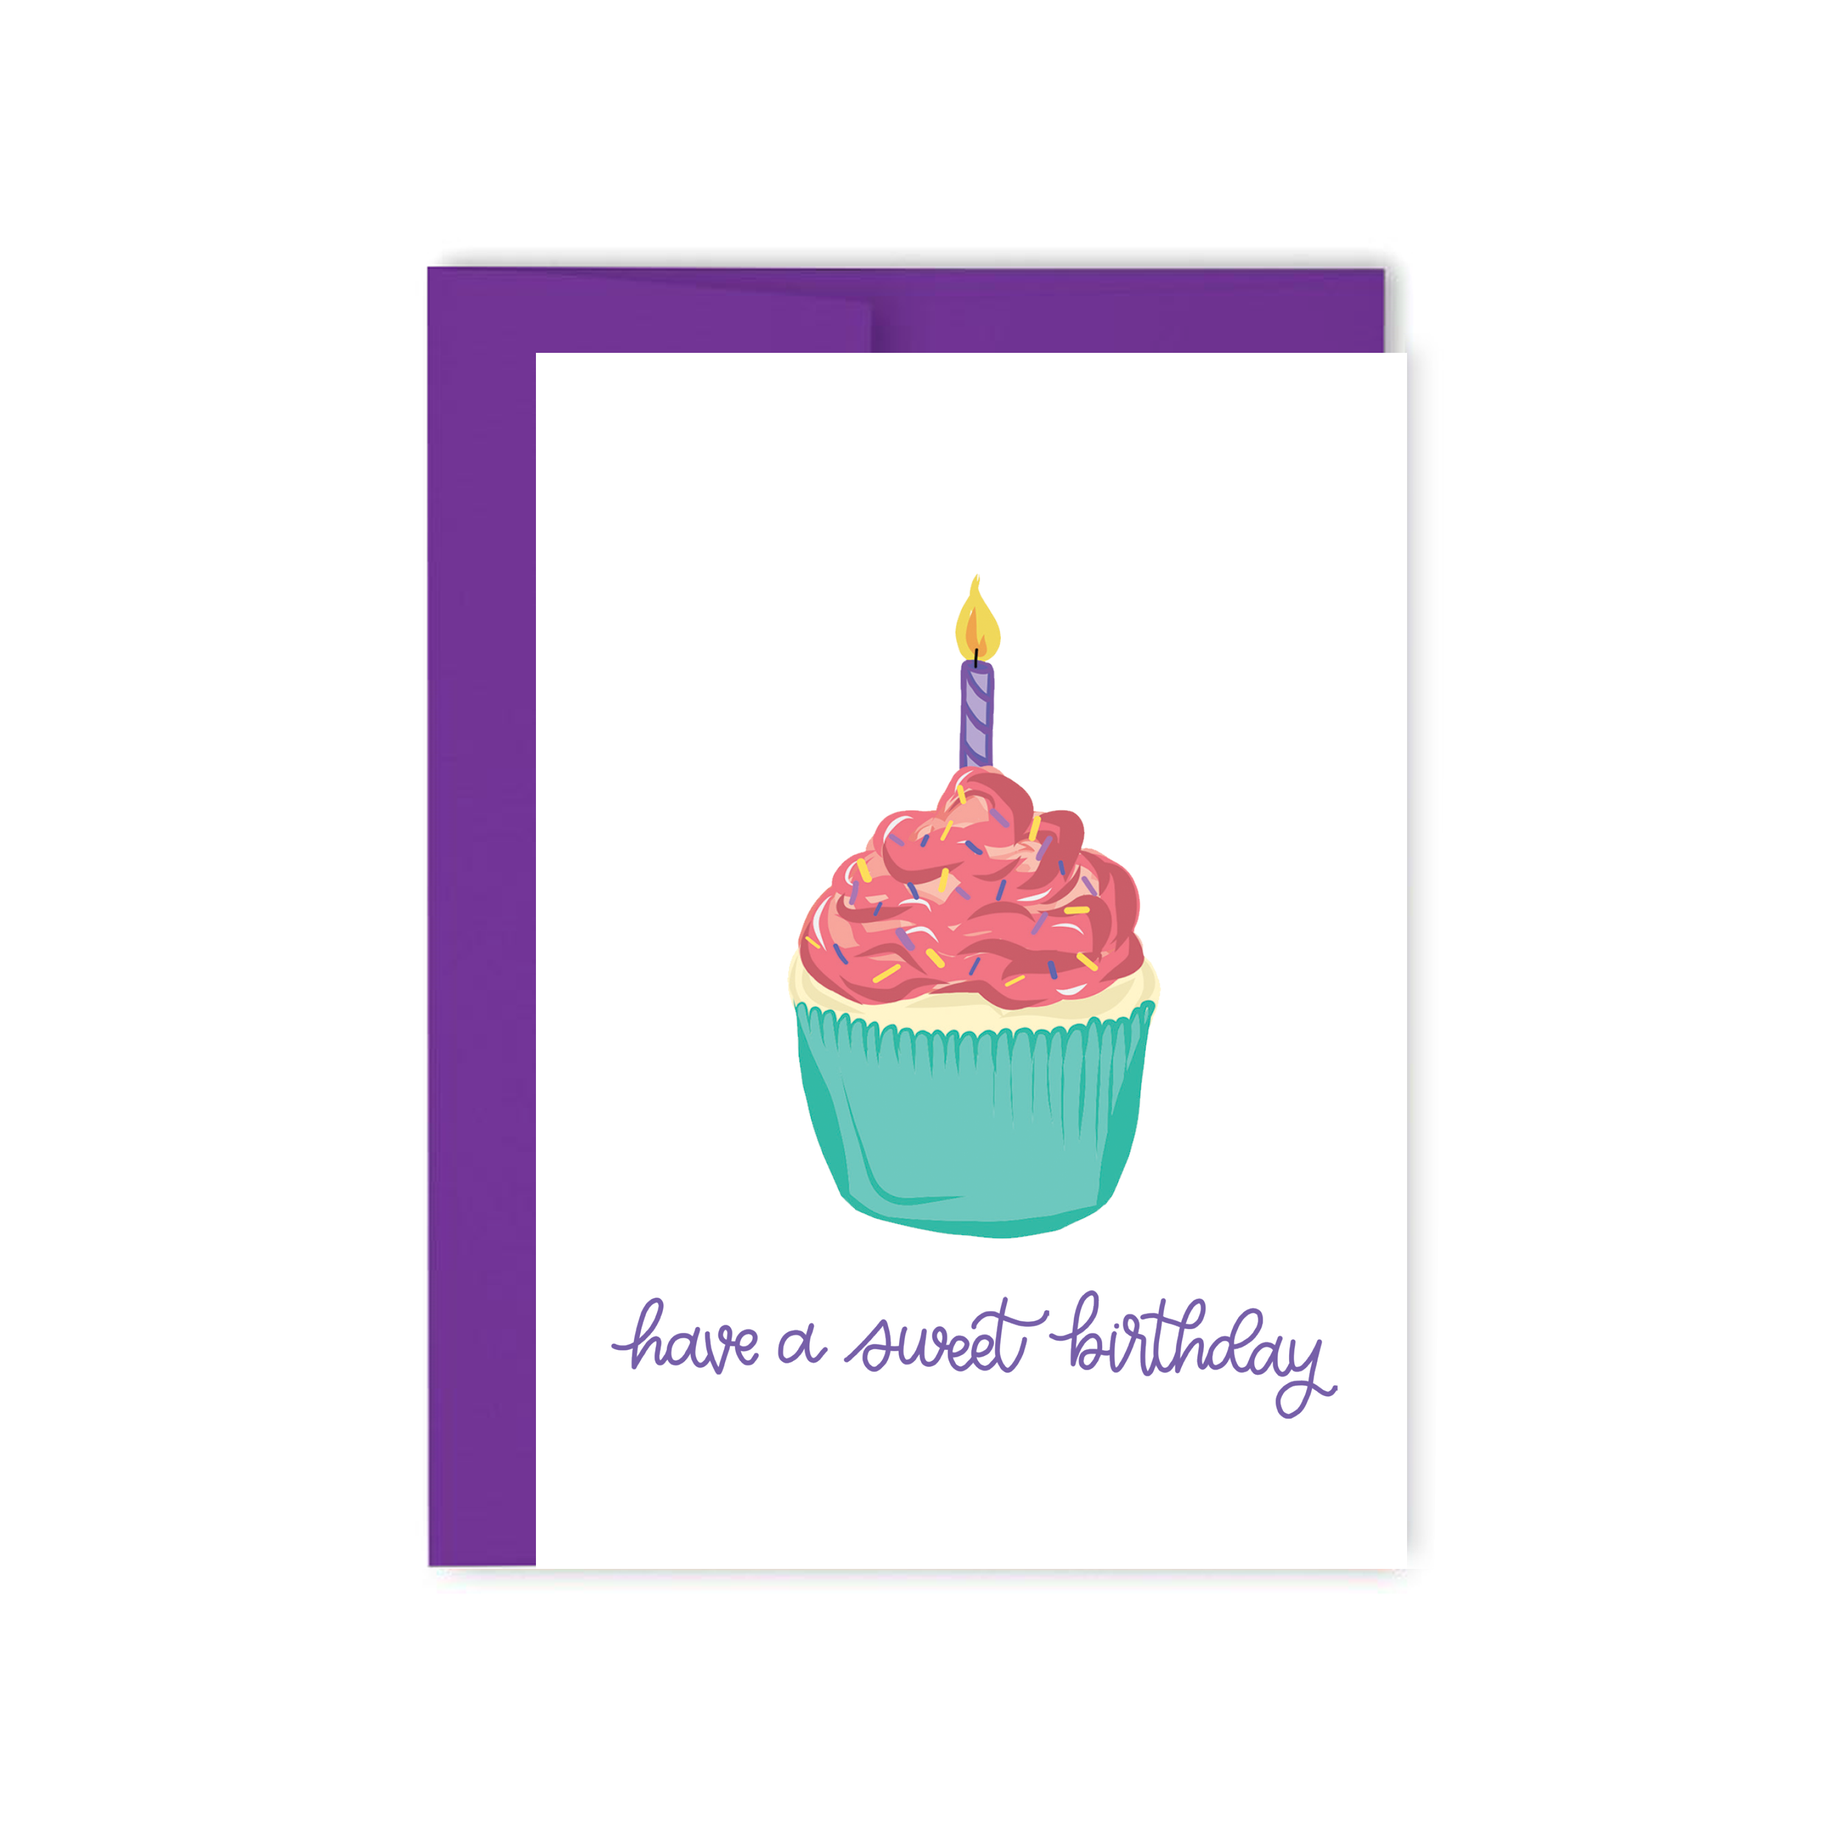 Have A Sweet Birthday Cupcake and Candle Birthday Card - Mellow Monkey